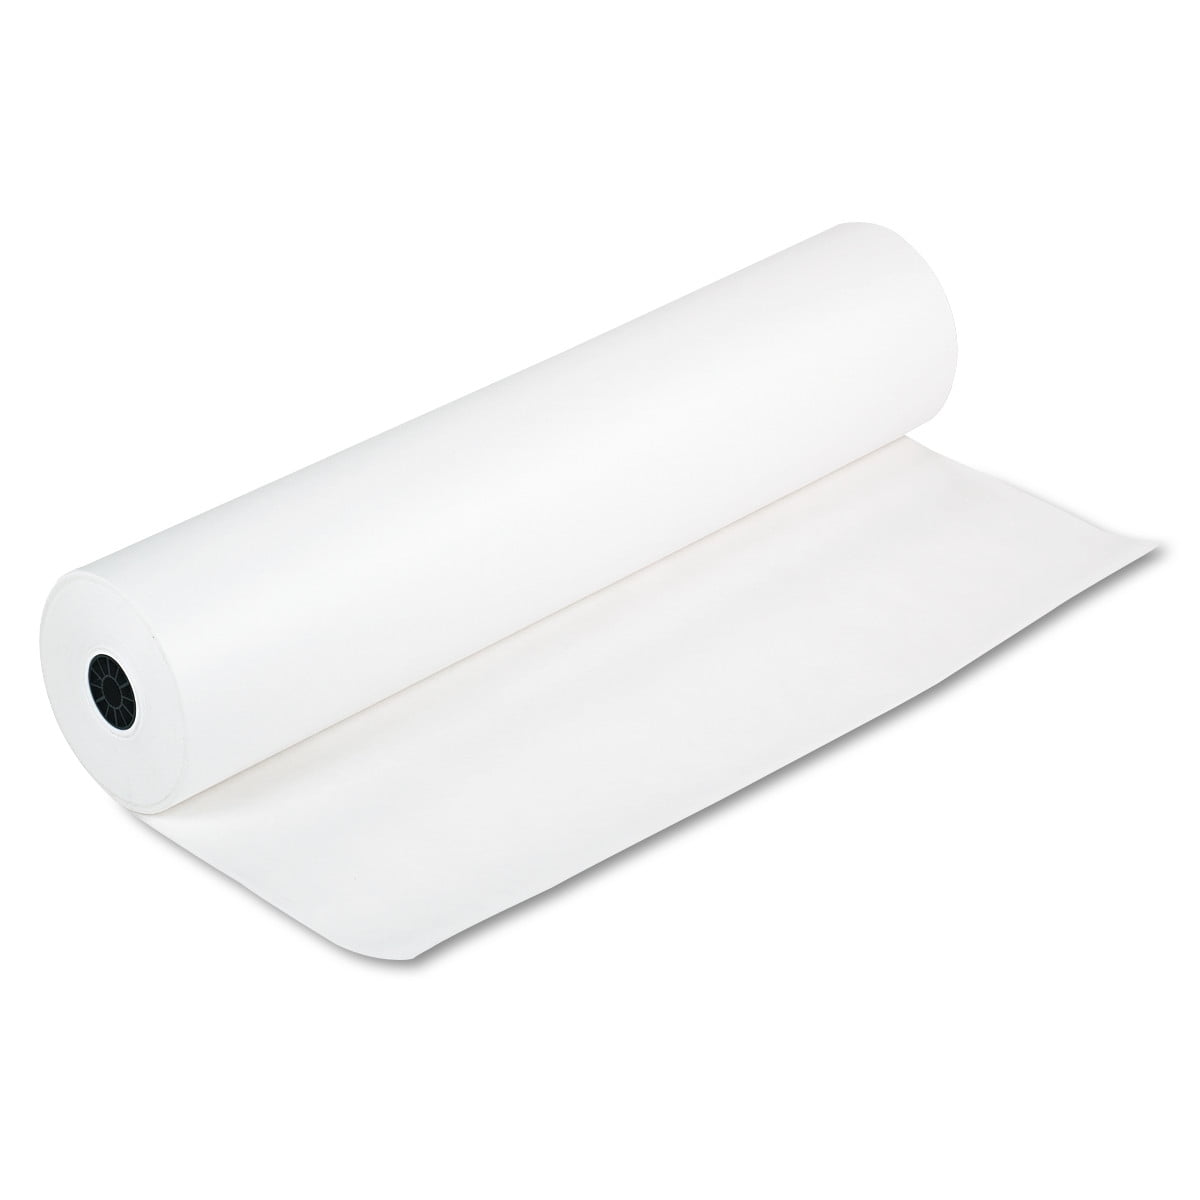 White Kraft Arts and Crafts Paper Roll – 2 Pack of 18” x 75' (900